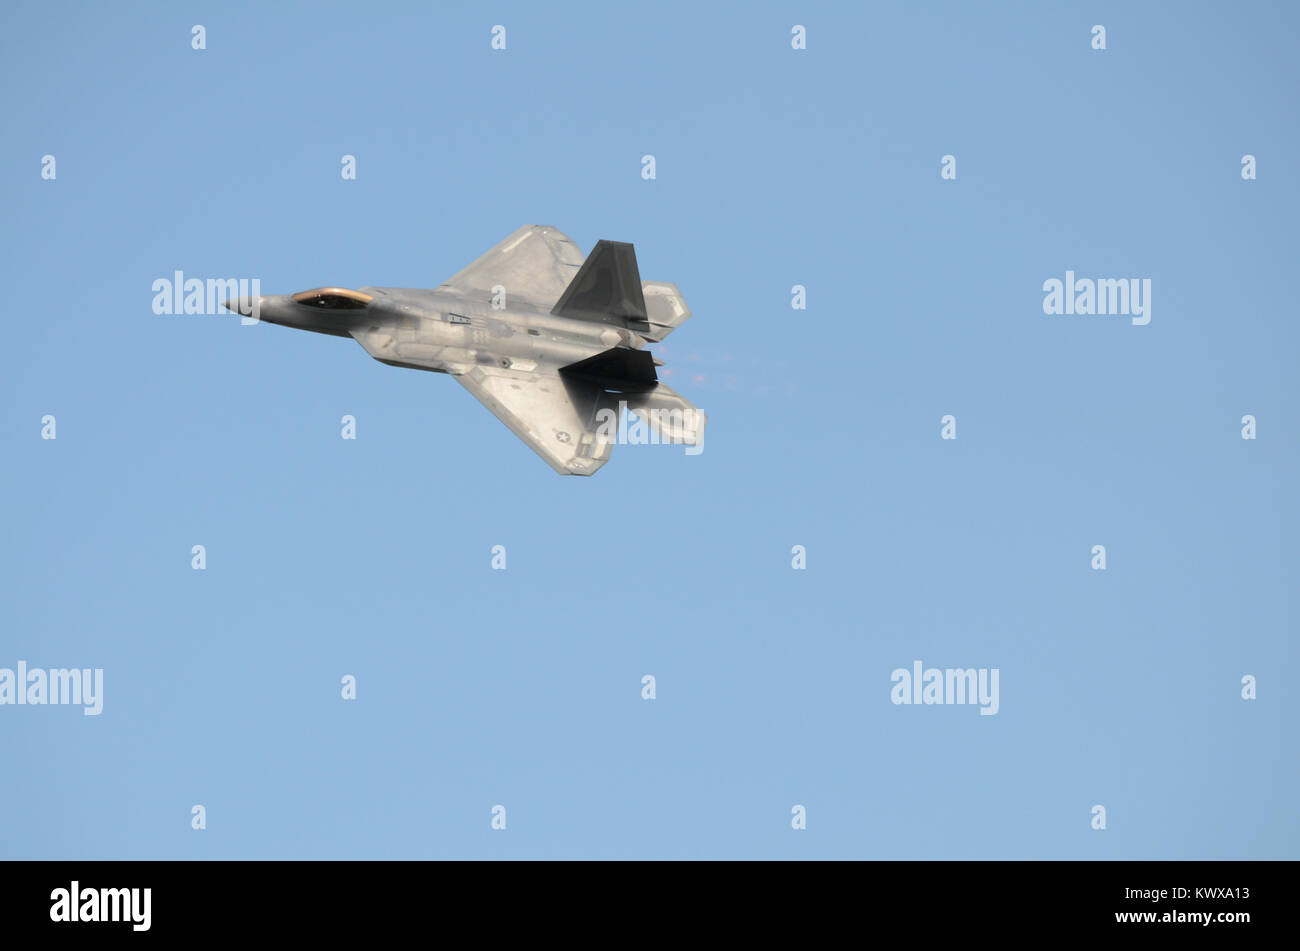 F22 Raptor fight jet against a clear blue sky Stock Photo